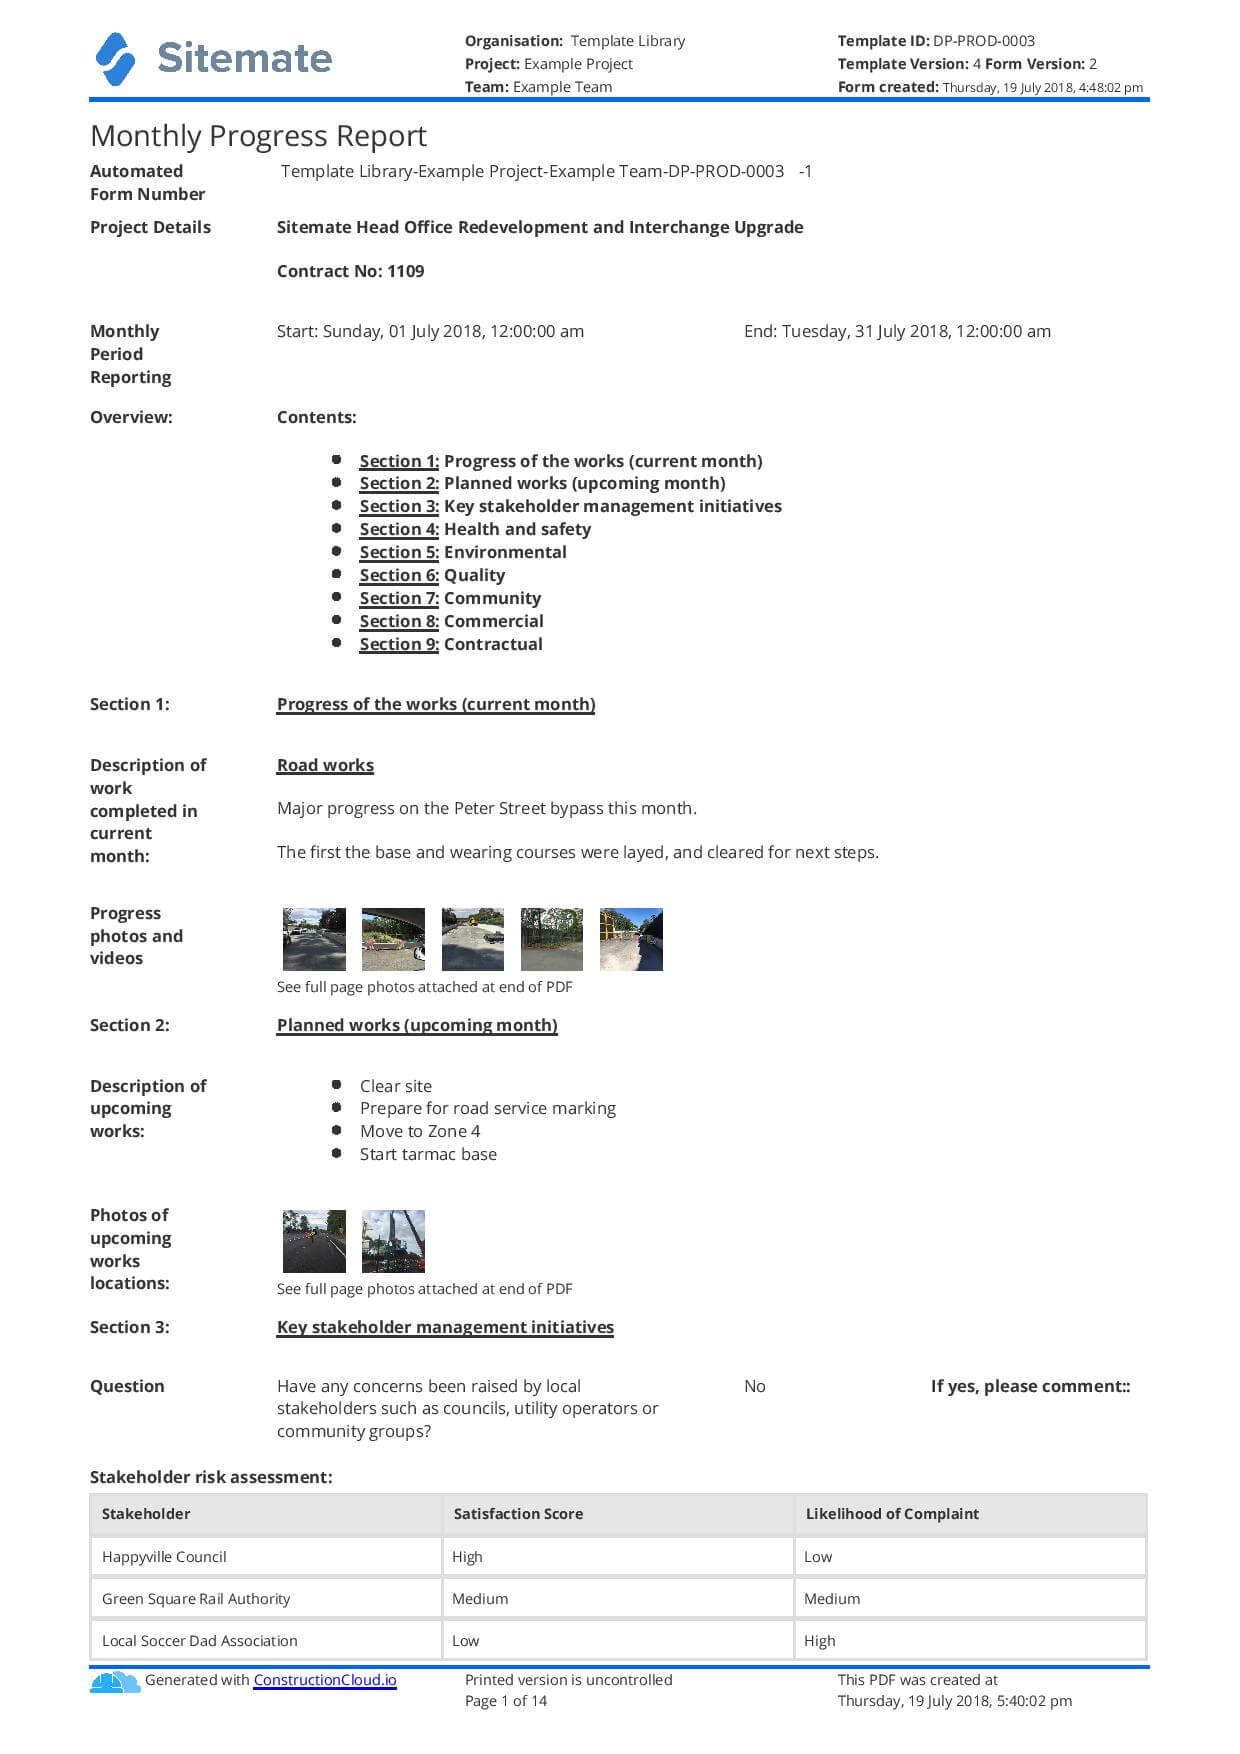 Monthly Construction Progress Report Template: Use This Pertaining To Monthly Project Progress Report Template